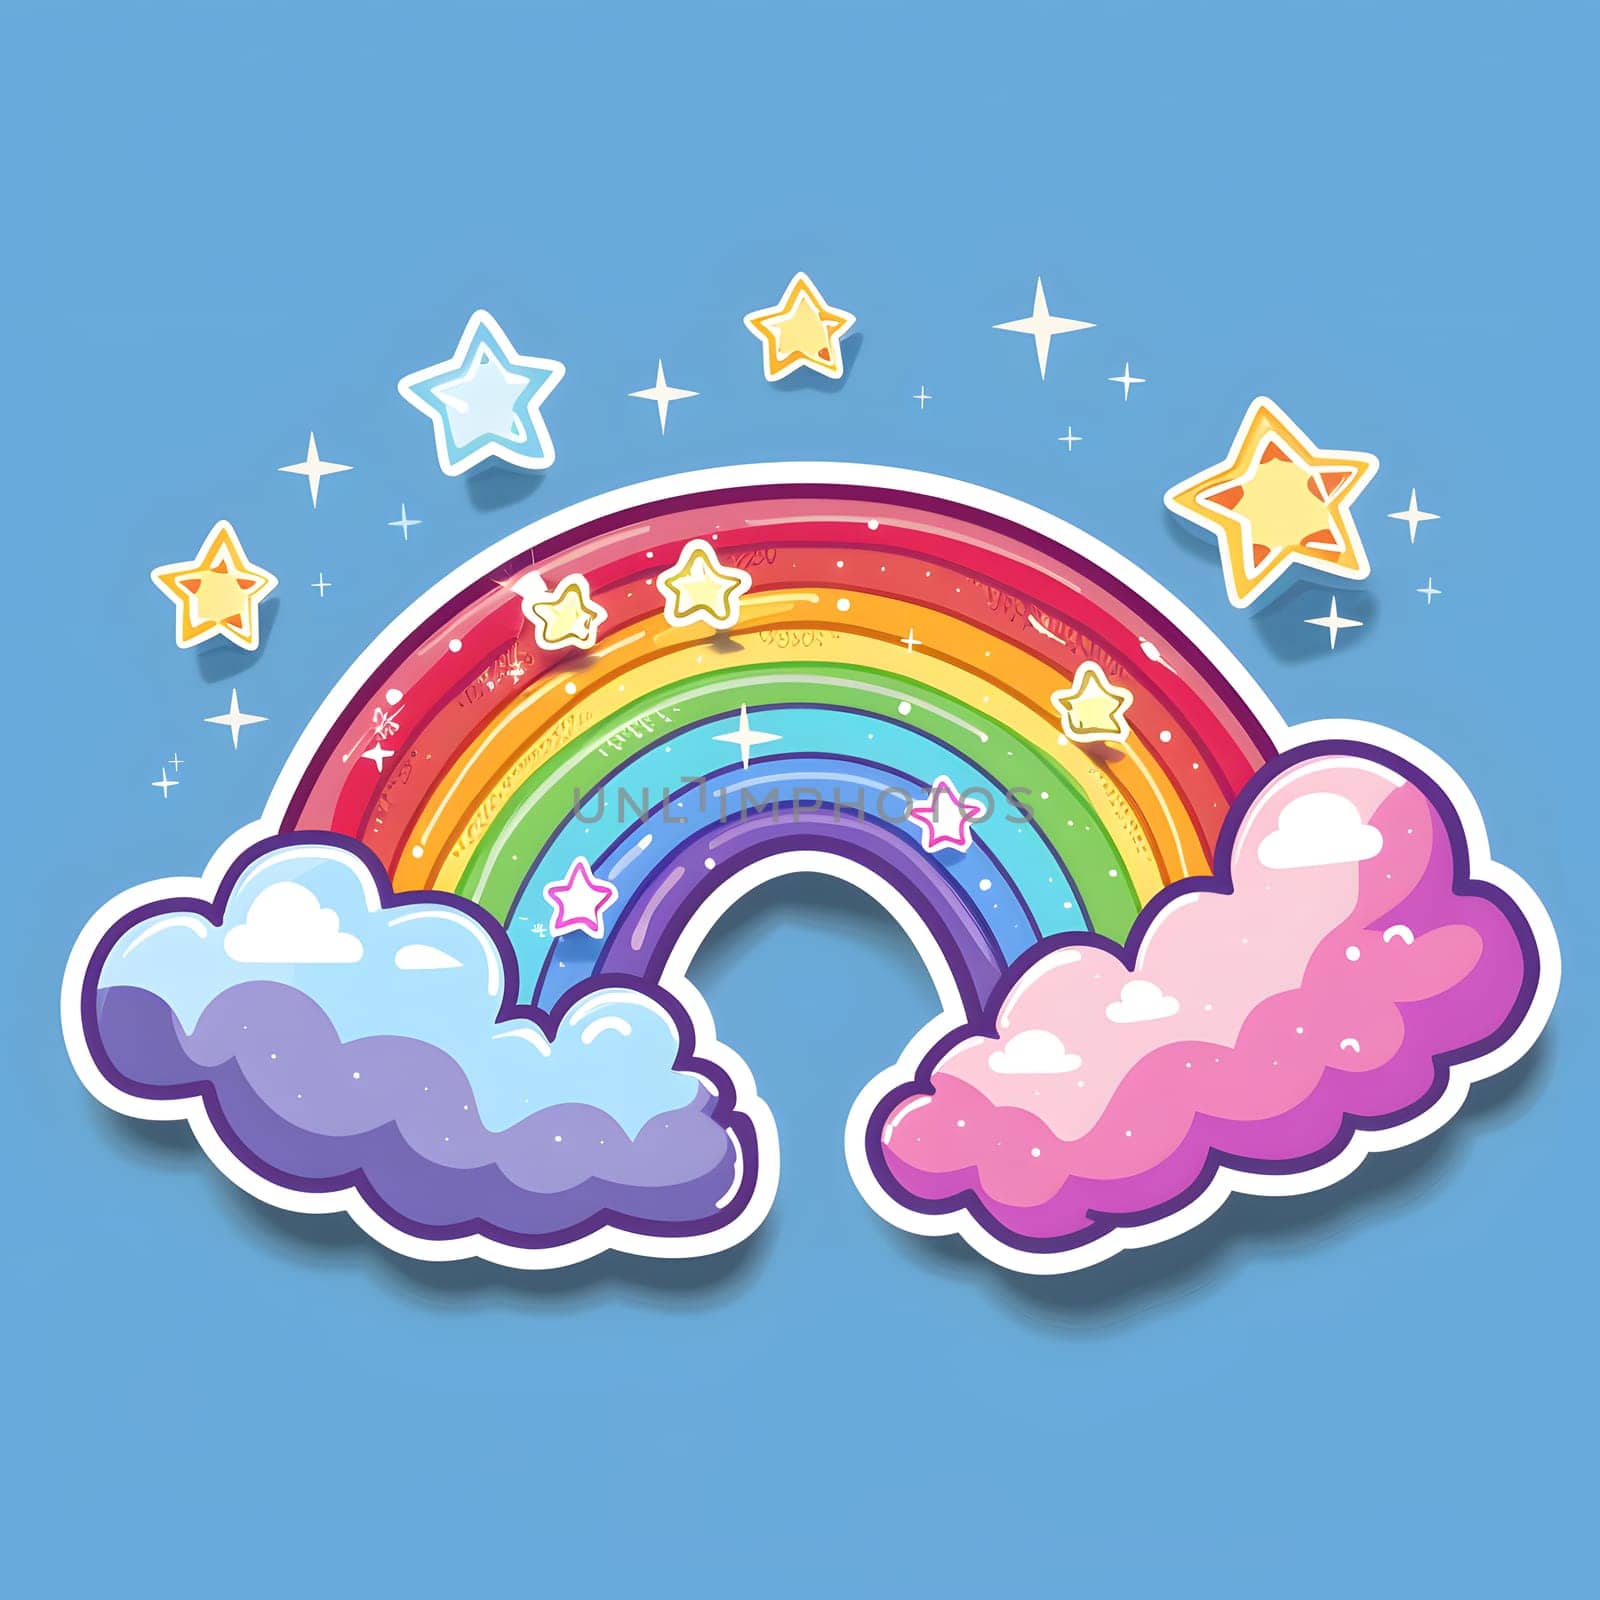 A rainbow shines brightly in the azure sky, surrounded by fluffy clouds and twinkling stars on a blue background